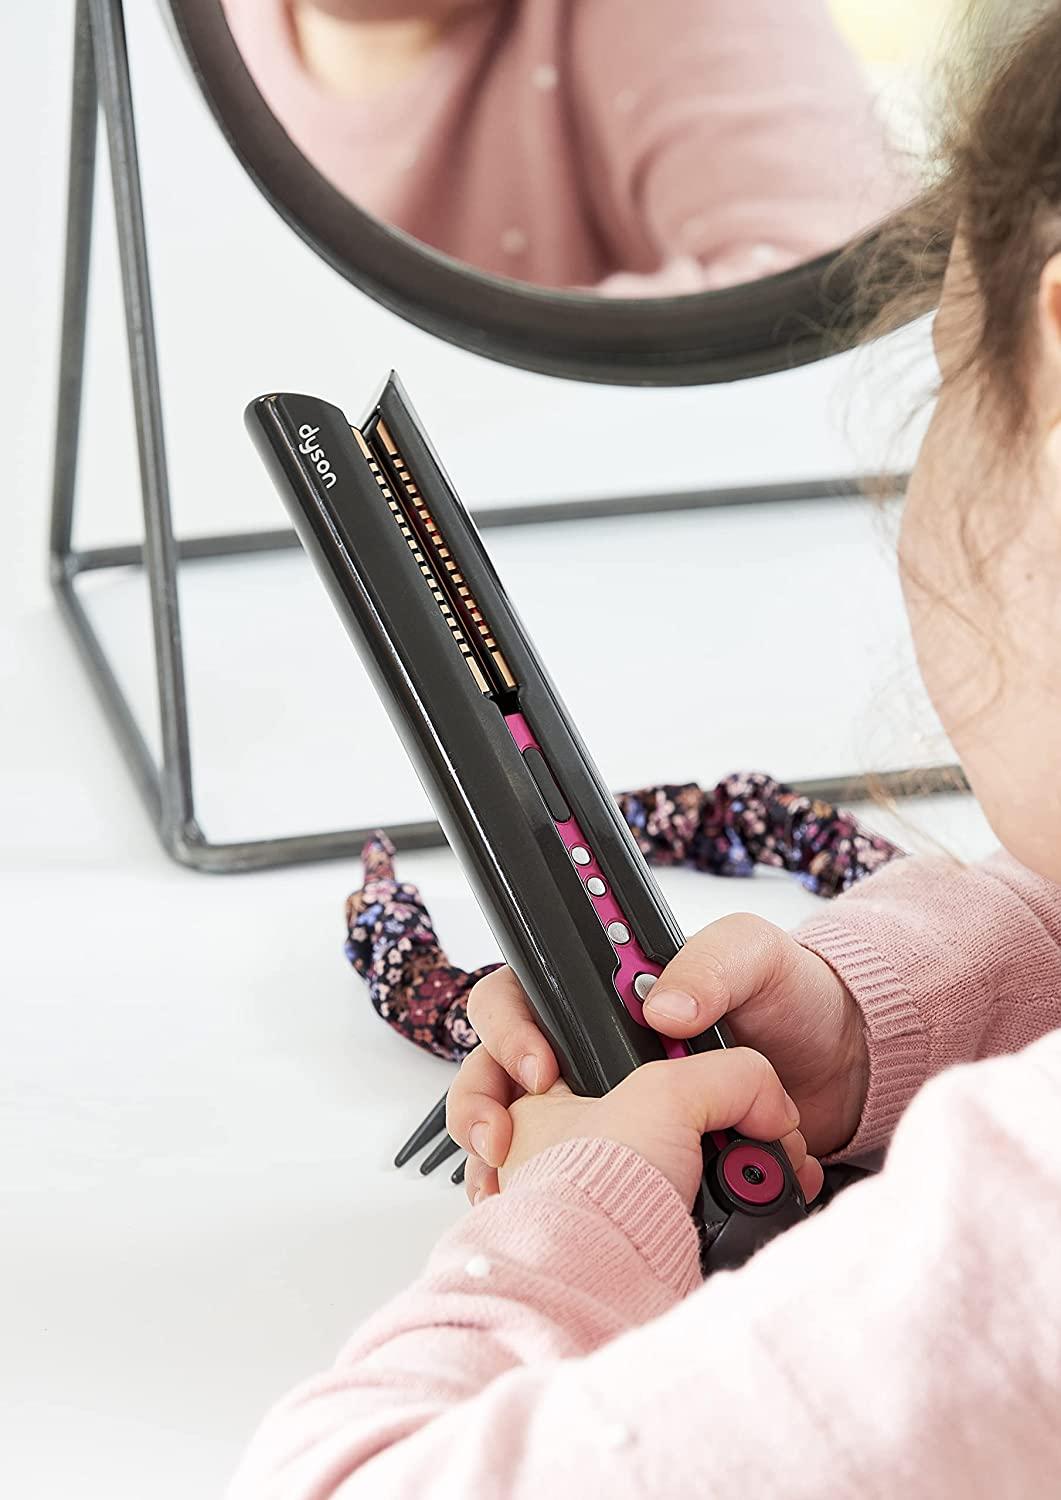 Casdon Dyson Supersonic & Corrale Deluxe Styling Set TOY Hairdryer & Straighteners For Children